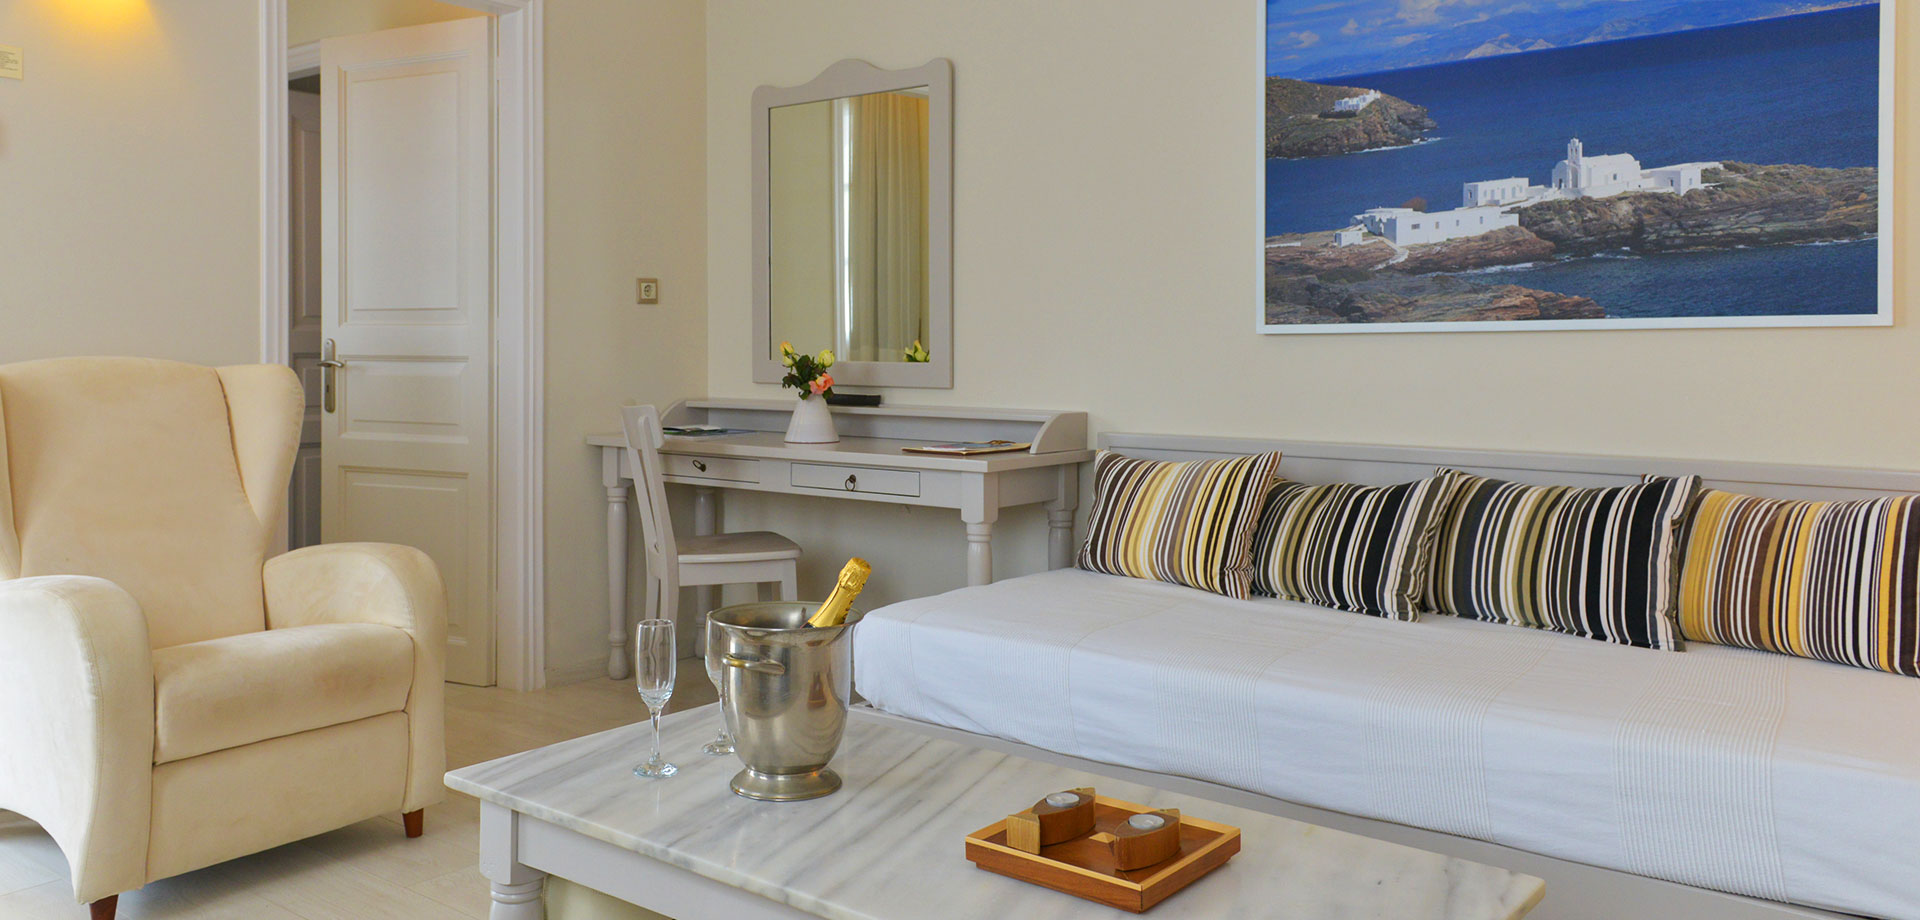 Comfortable stay in Sifnos hotel Petali